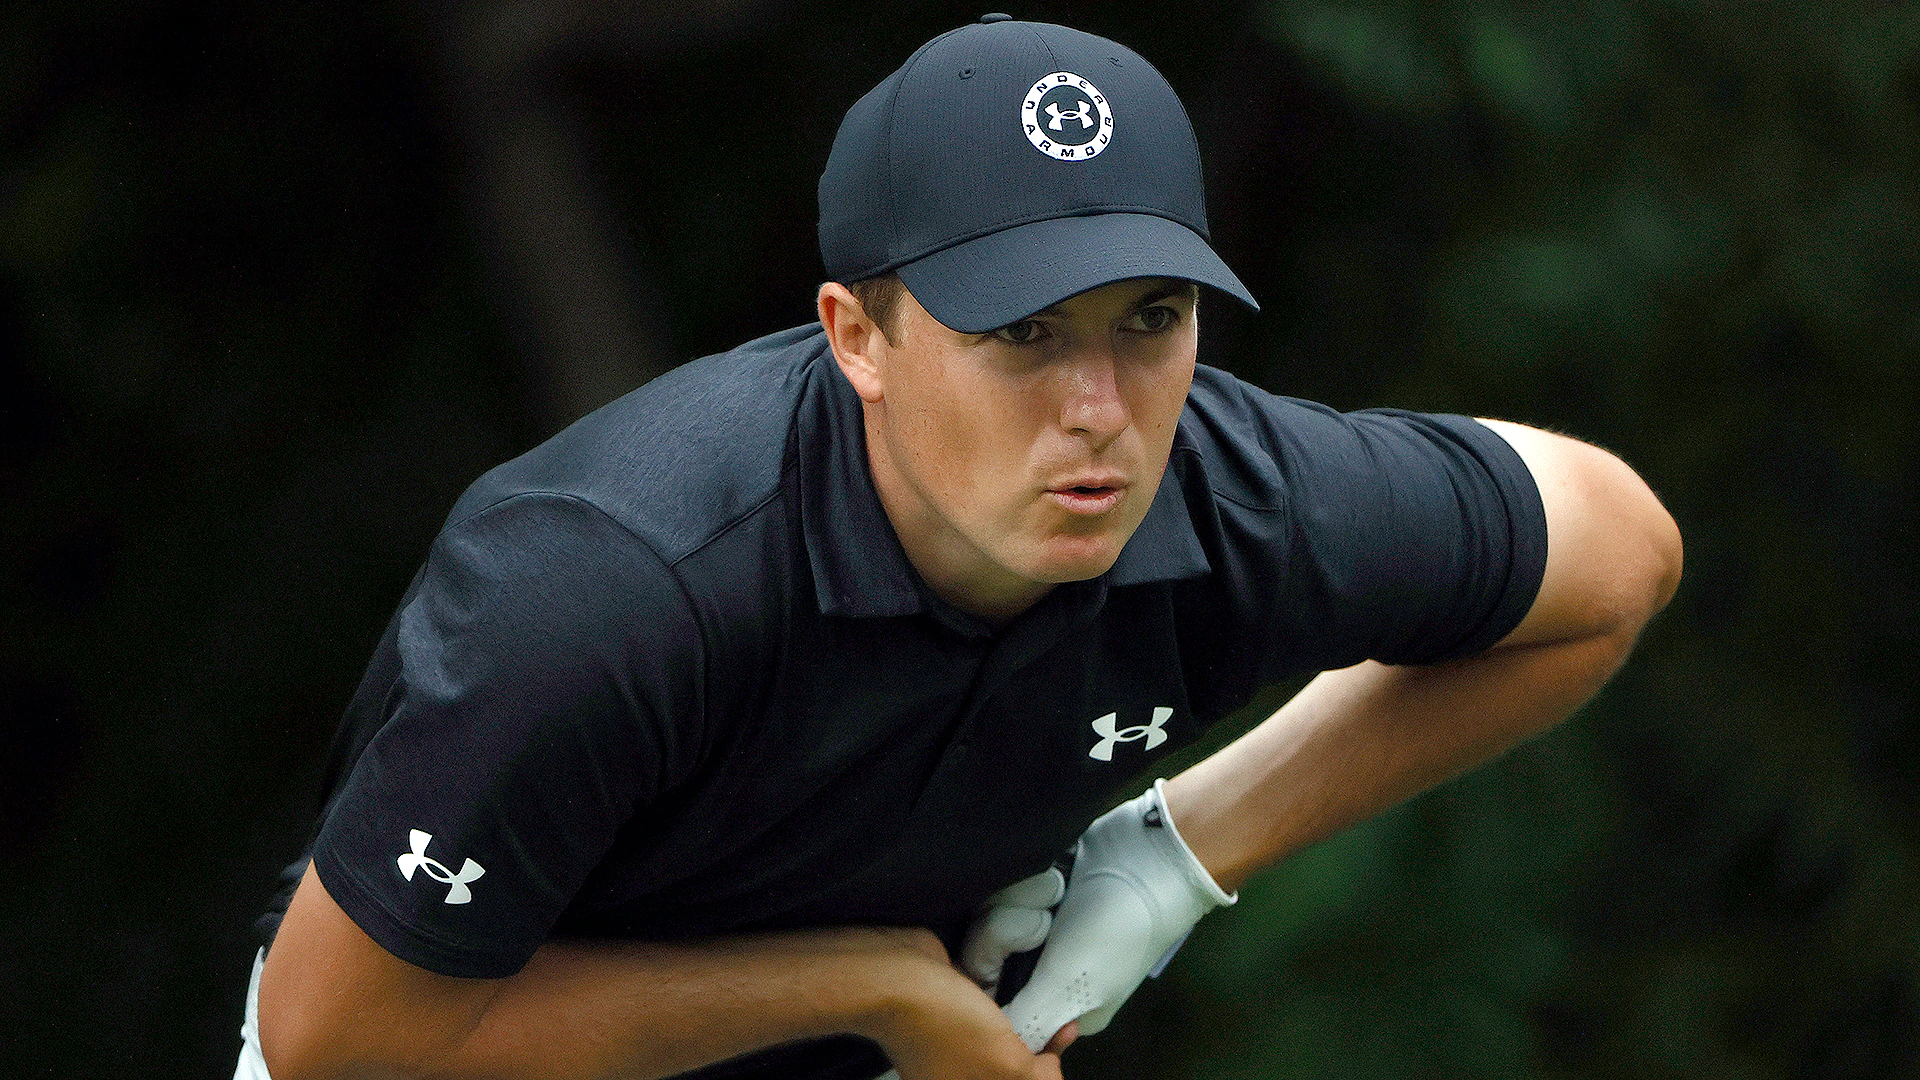 Jordan Spieth leads at Colonial as Phil Mickelson bogeys final hole to miss cut